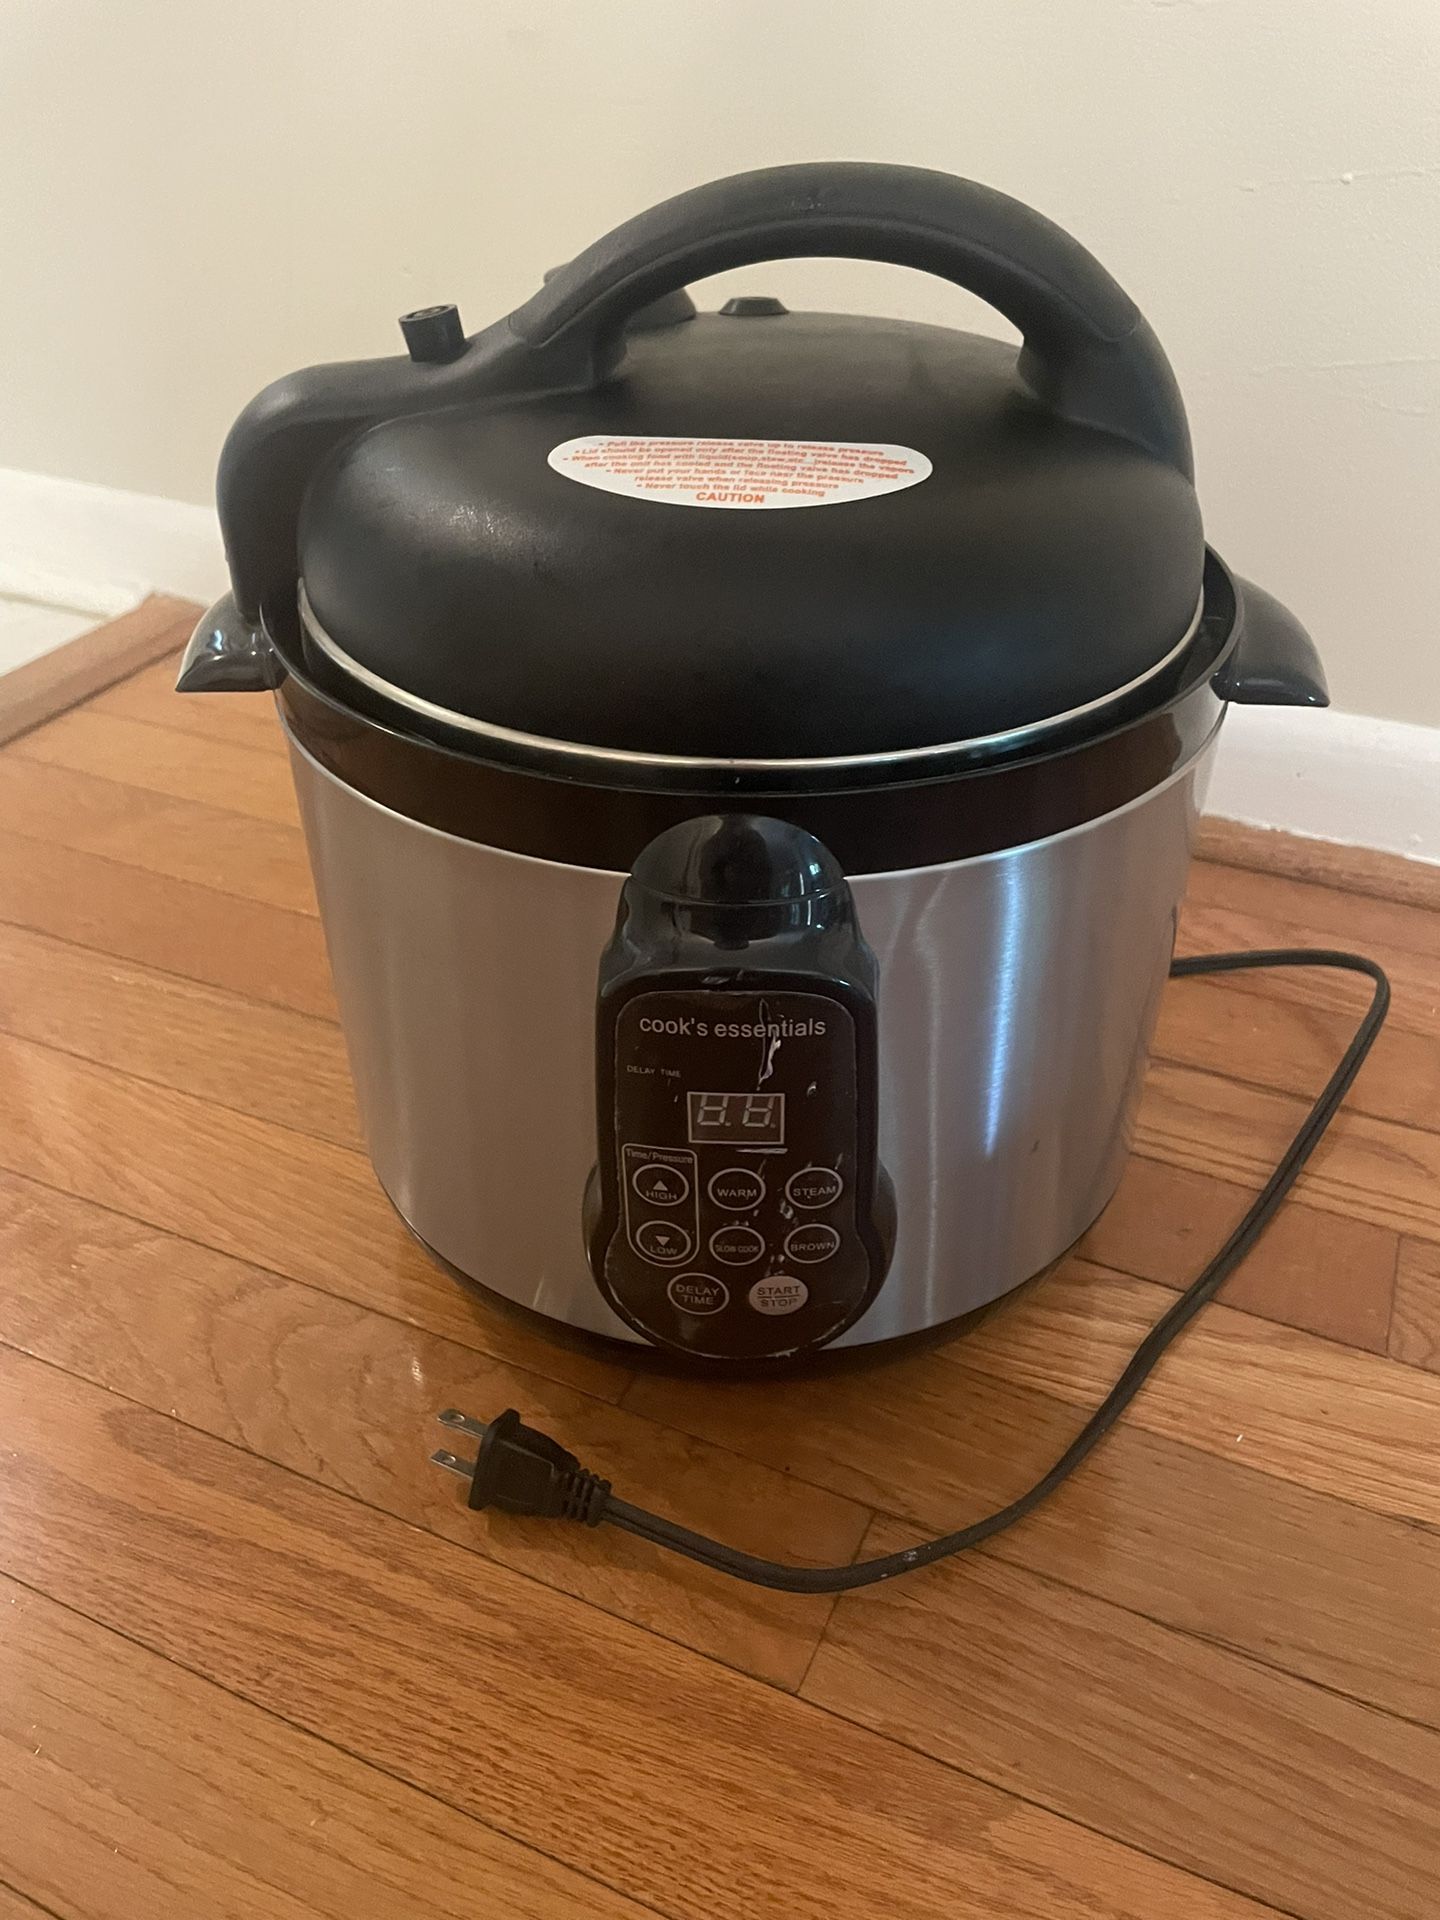 Pre-Owned/Barely Used*Yedi 6 qt. Pressure Cooker w/Accessories*Model GV014